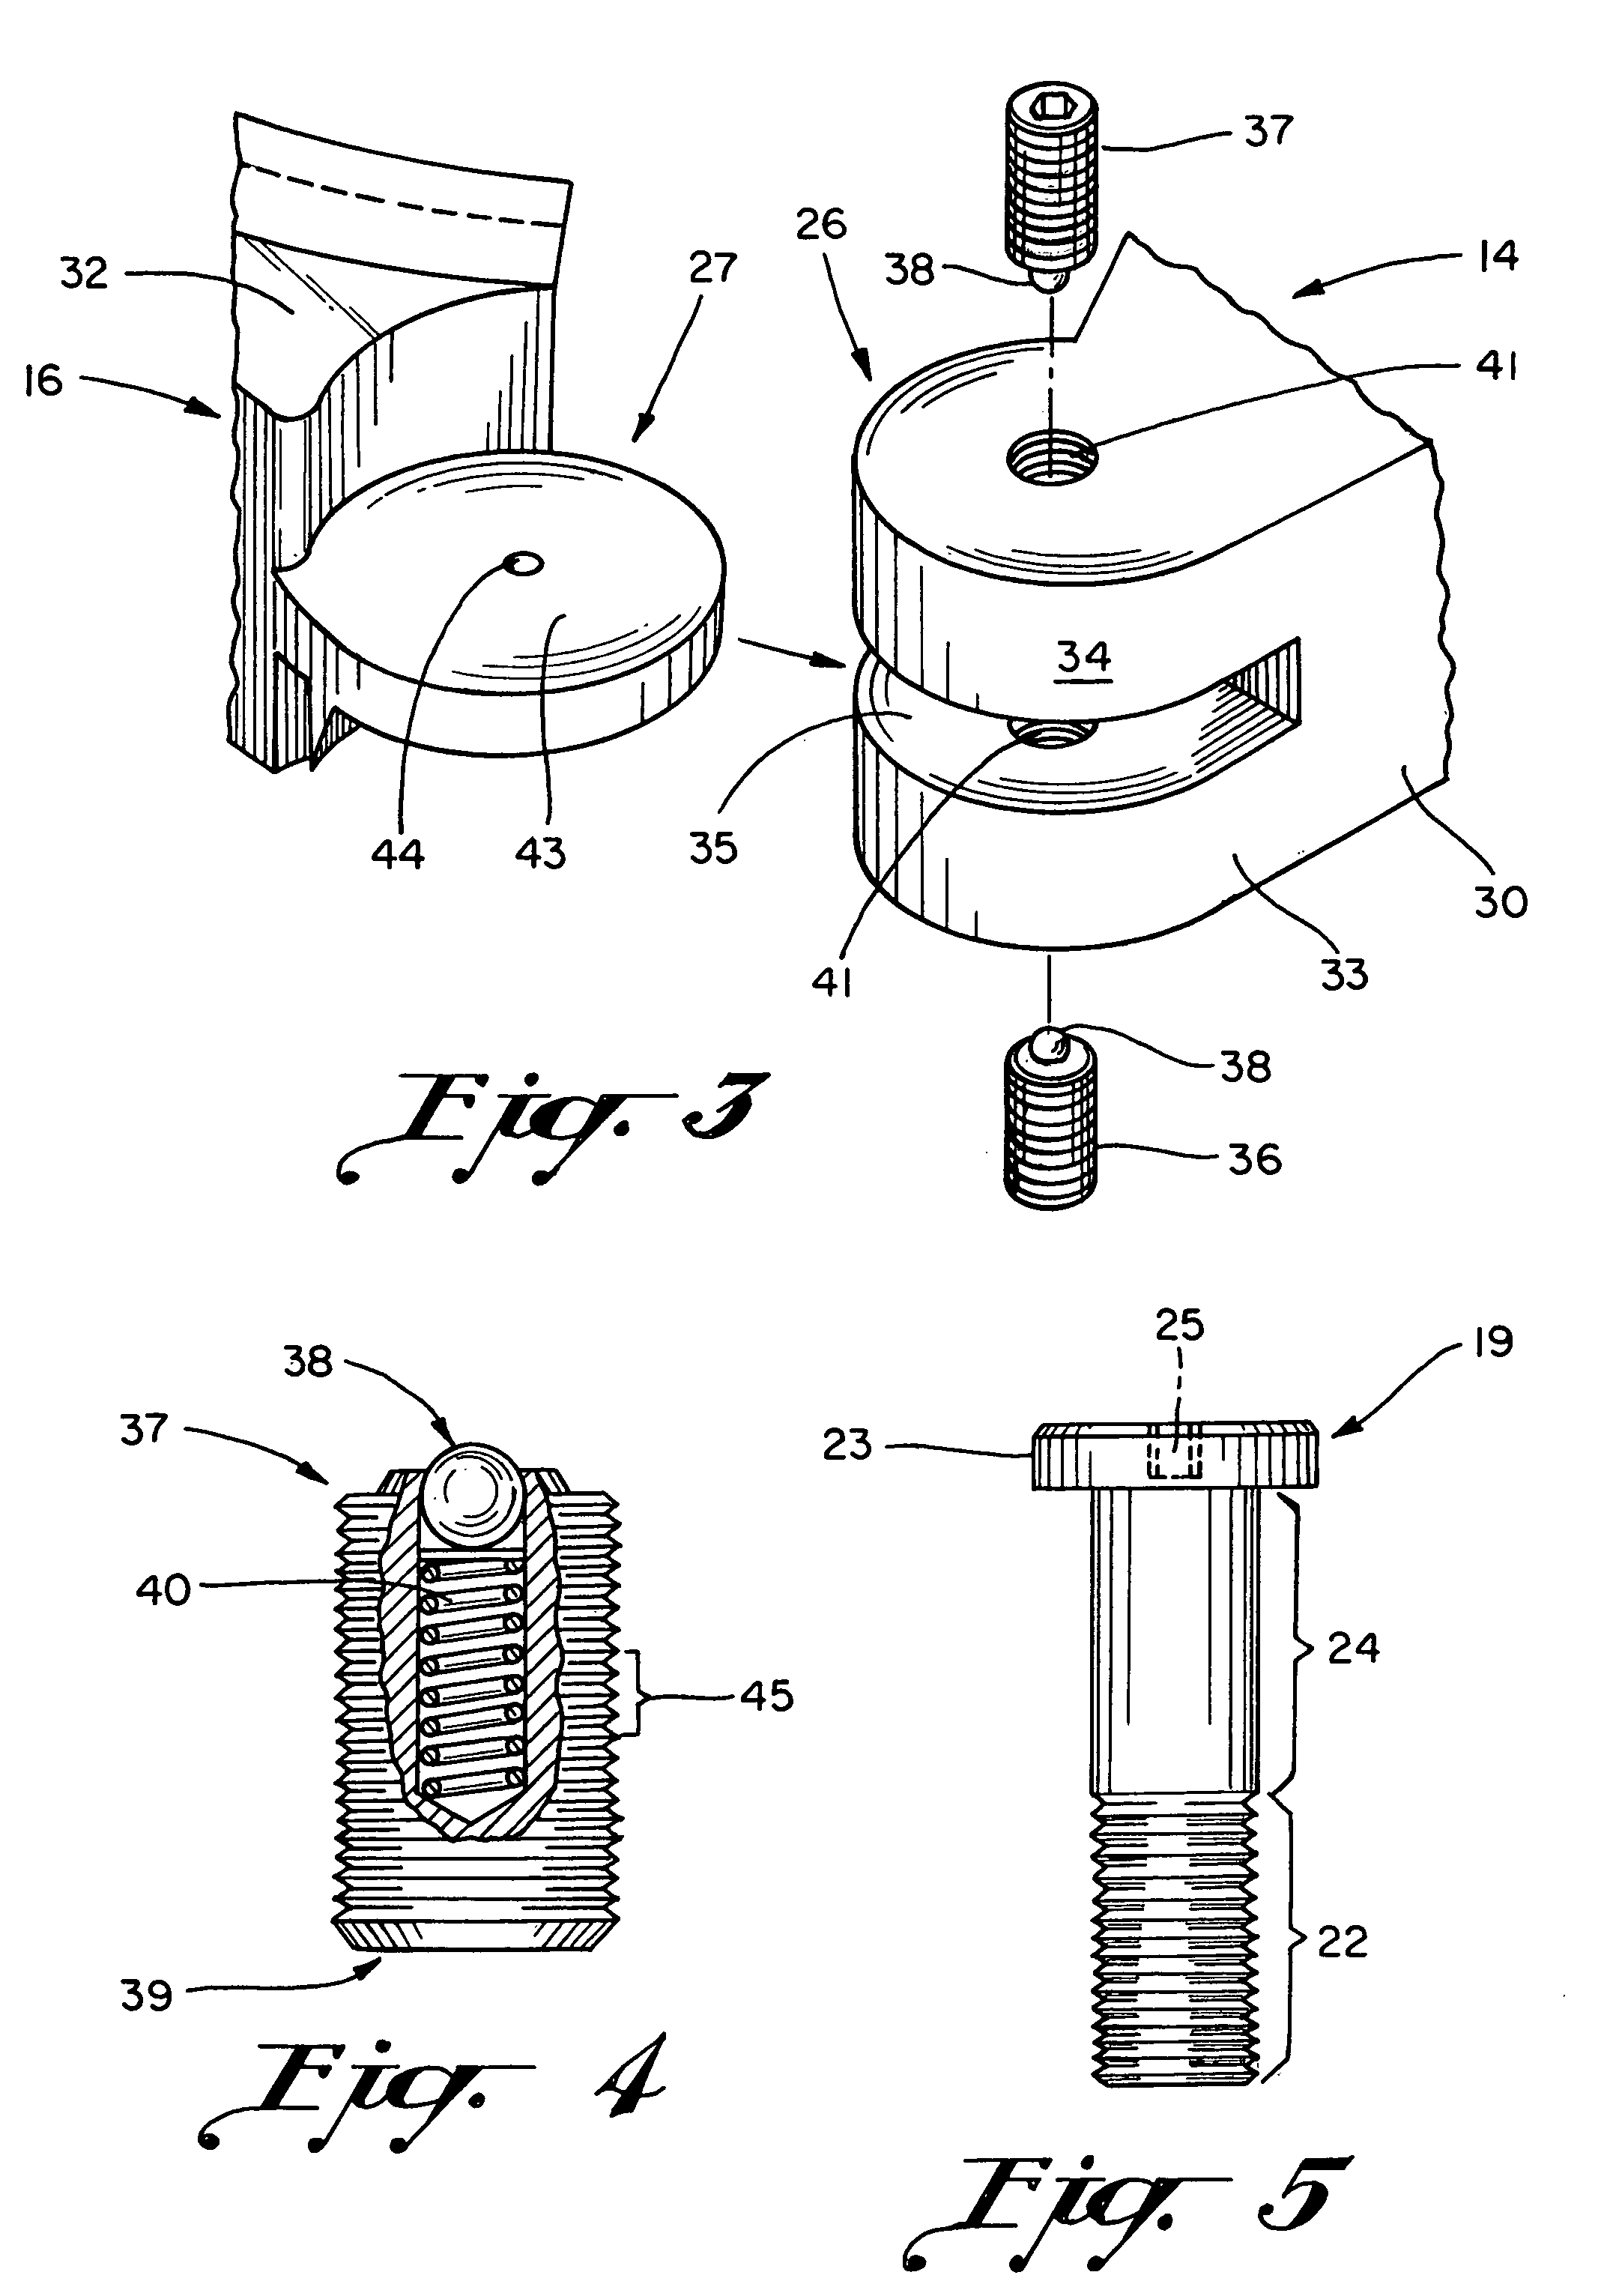 Dual-sectioned grounding bushing assembly